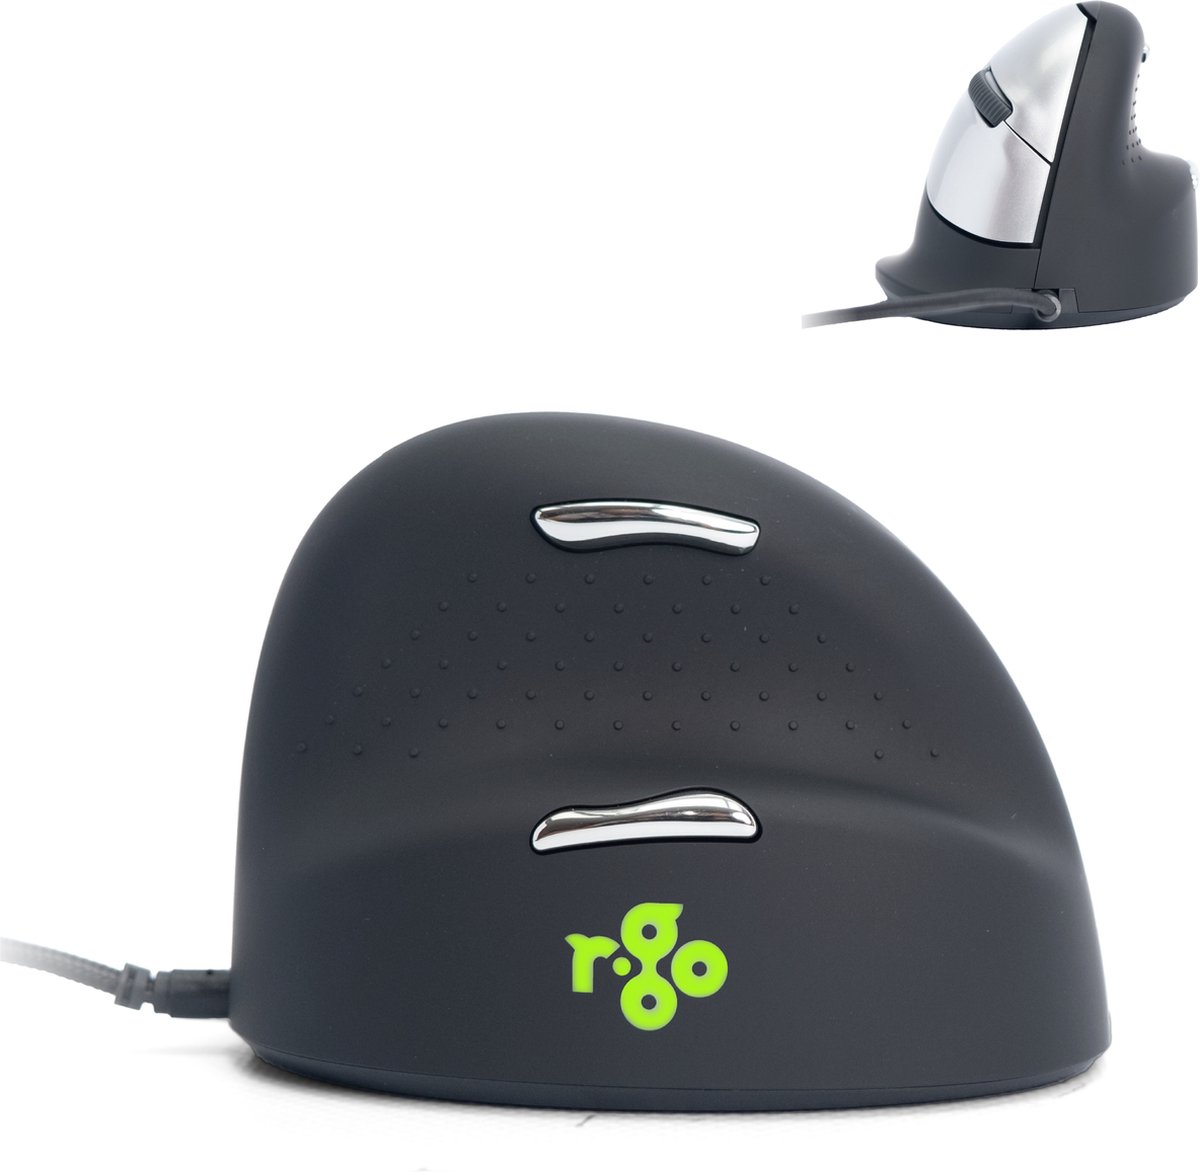 R-Go HE Break ergonomic mouse, vertical mouse with break software, prevents RSI, medium (hand length 165-185mm), right handed, wired, black